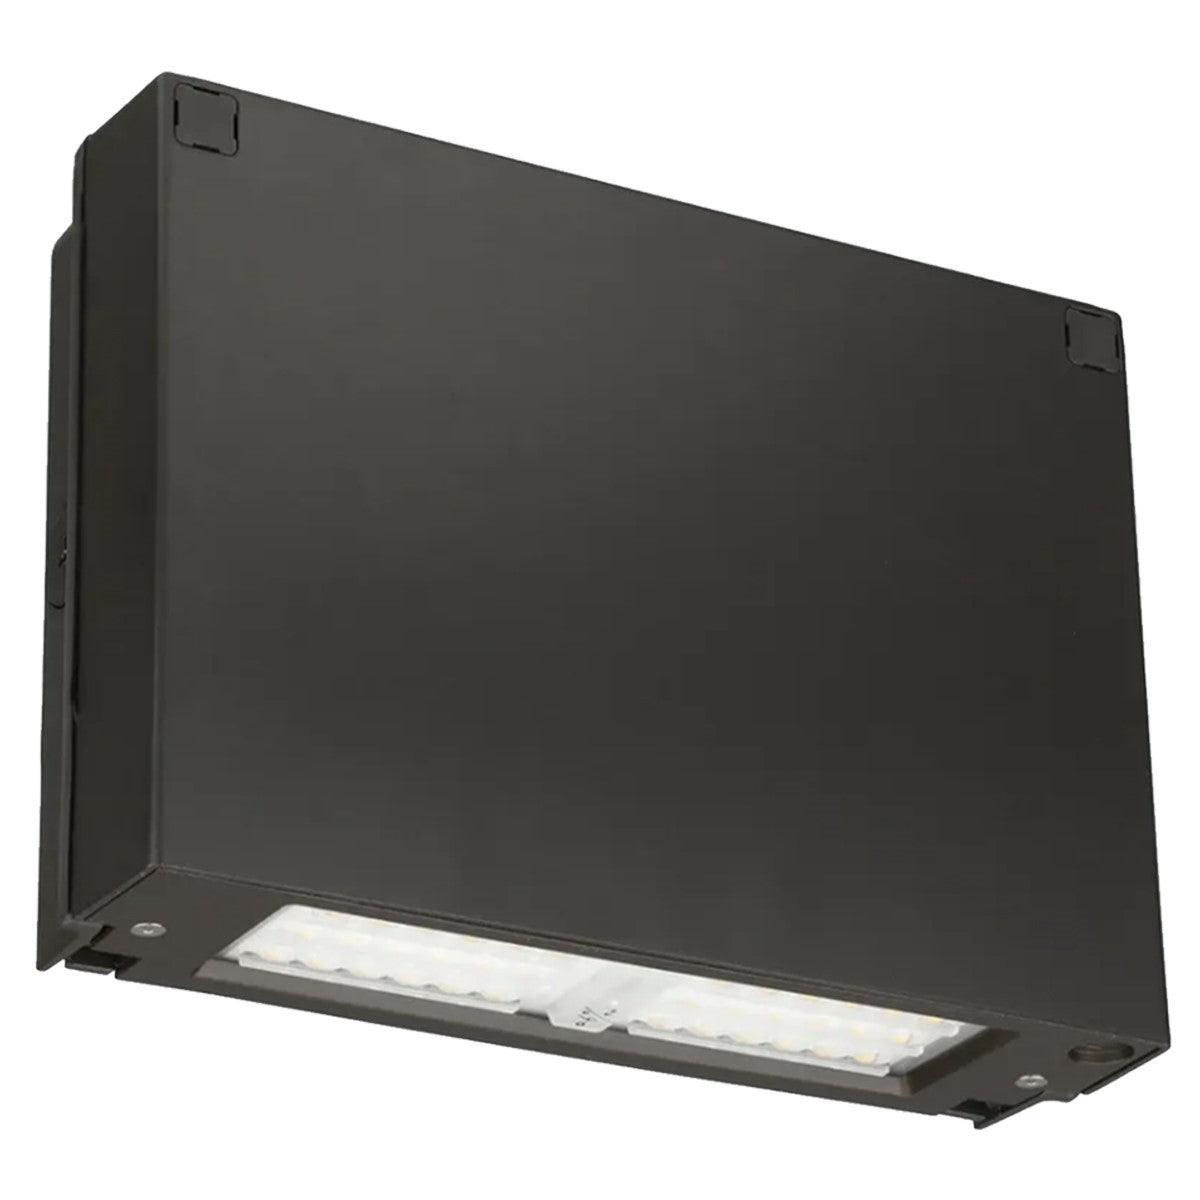 LED Wall Pack Light, Full Cut-Off, 3000 Lumens, 150W MH Replacement, 4000K, 120-277V